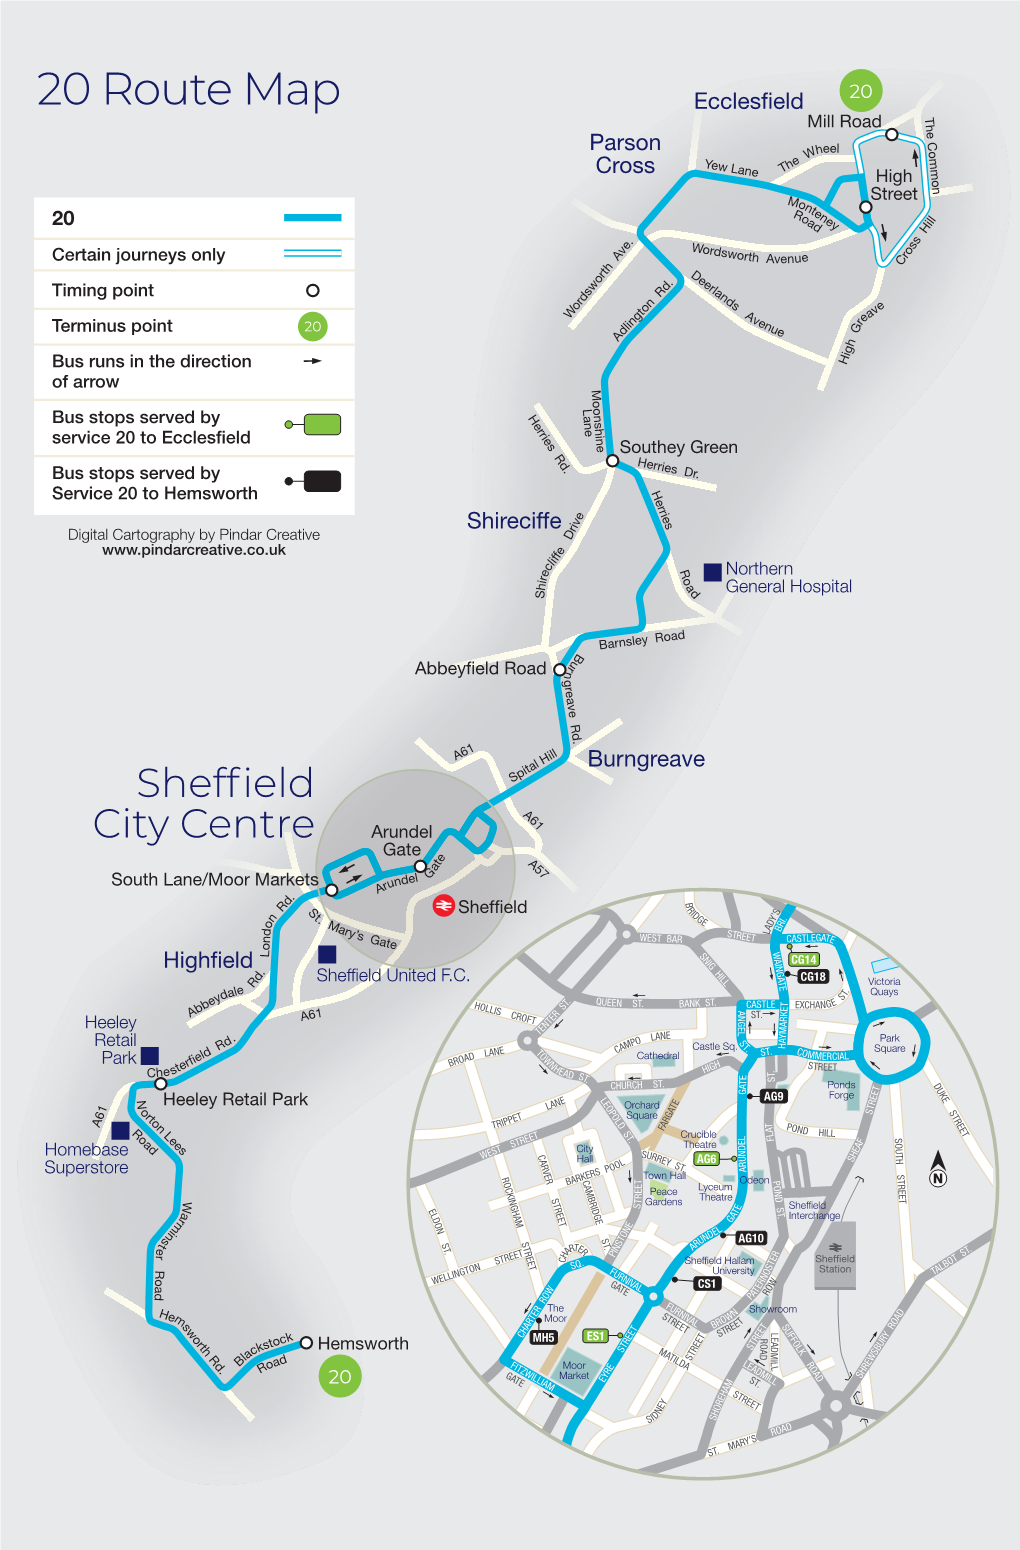 20 Route Map Ecclesfield 20 Mondays to Fridays (Except Public Holidays) Saturdays T Mill Road H E